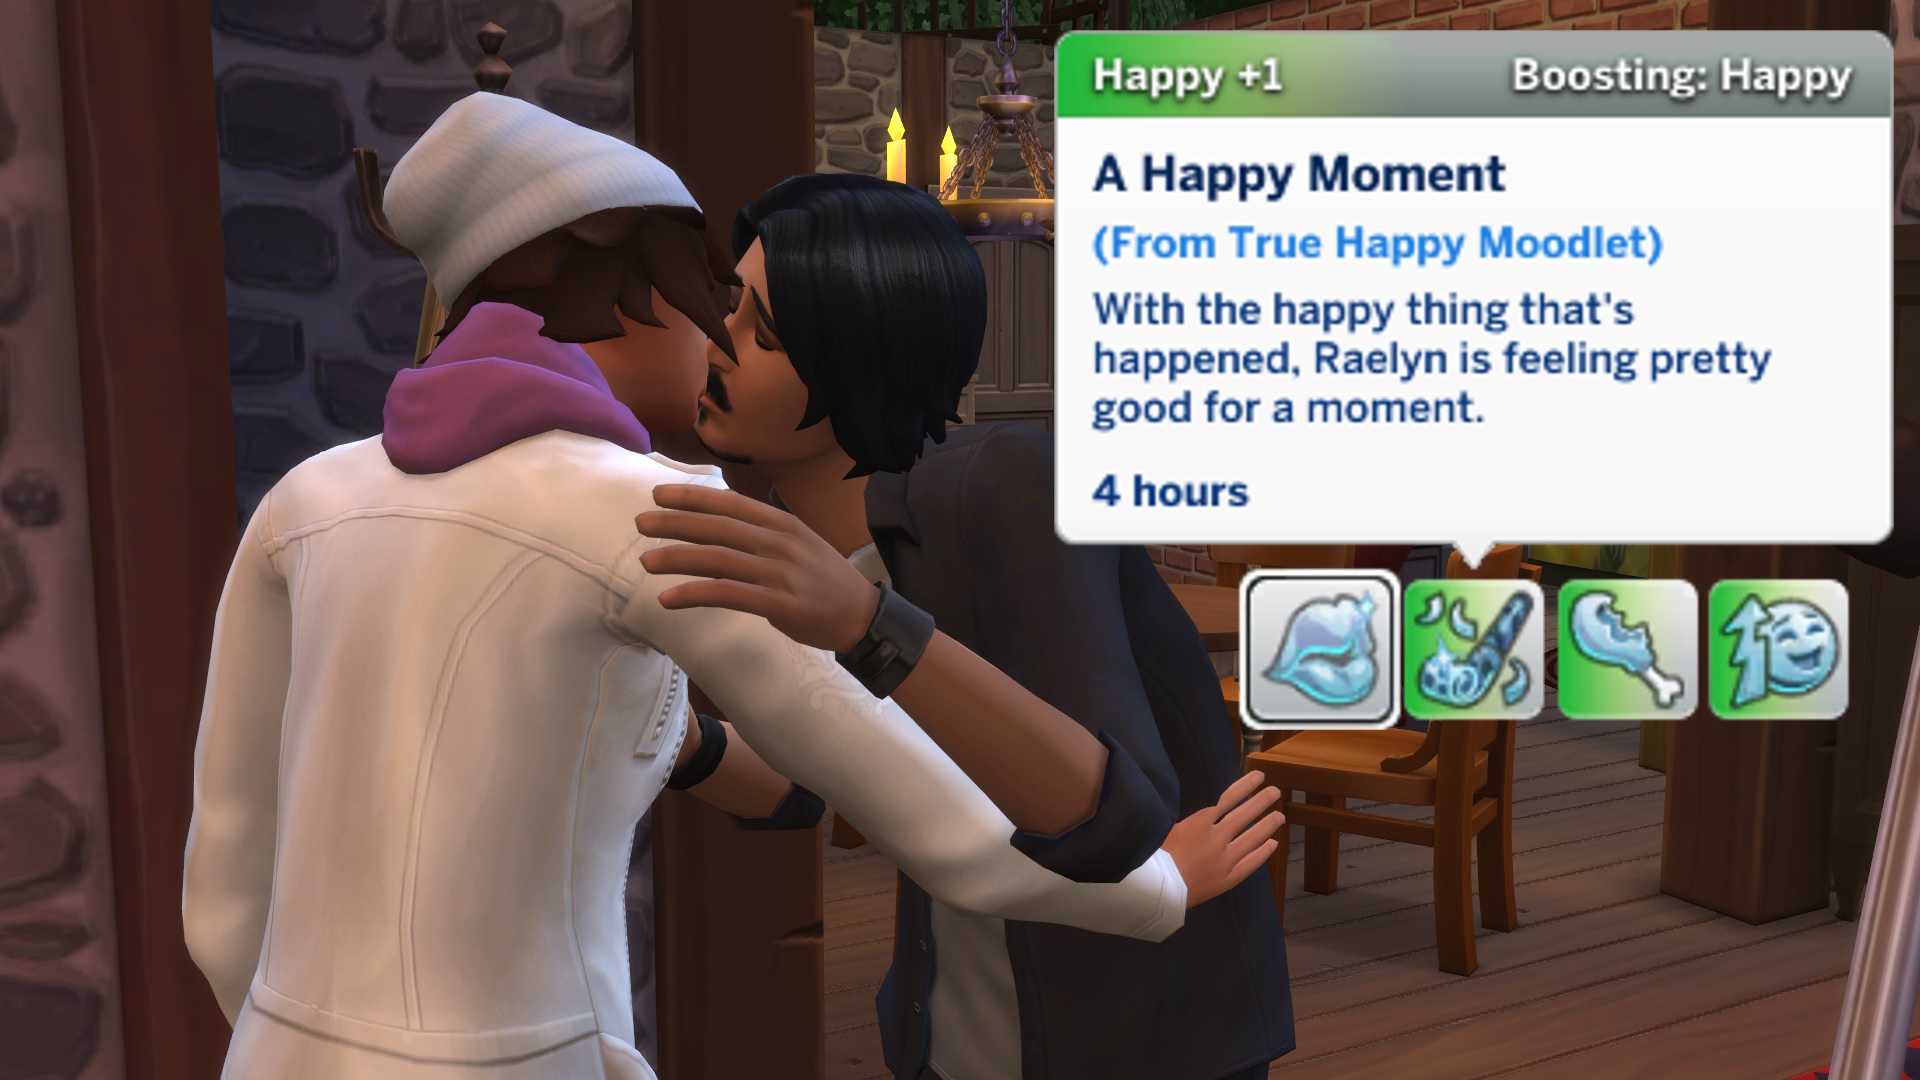 Sims 4 mods: Meaningful stories